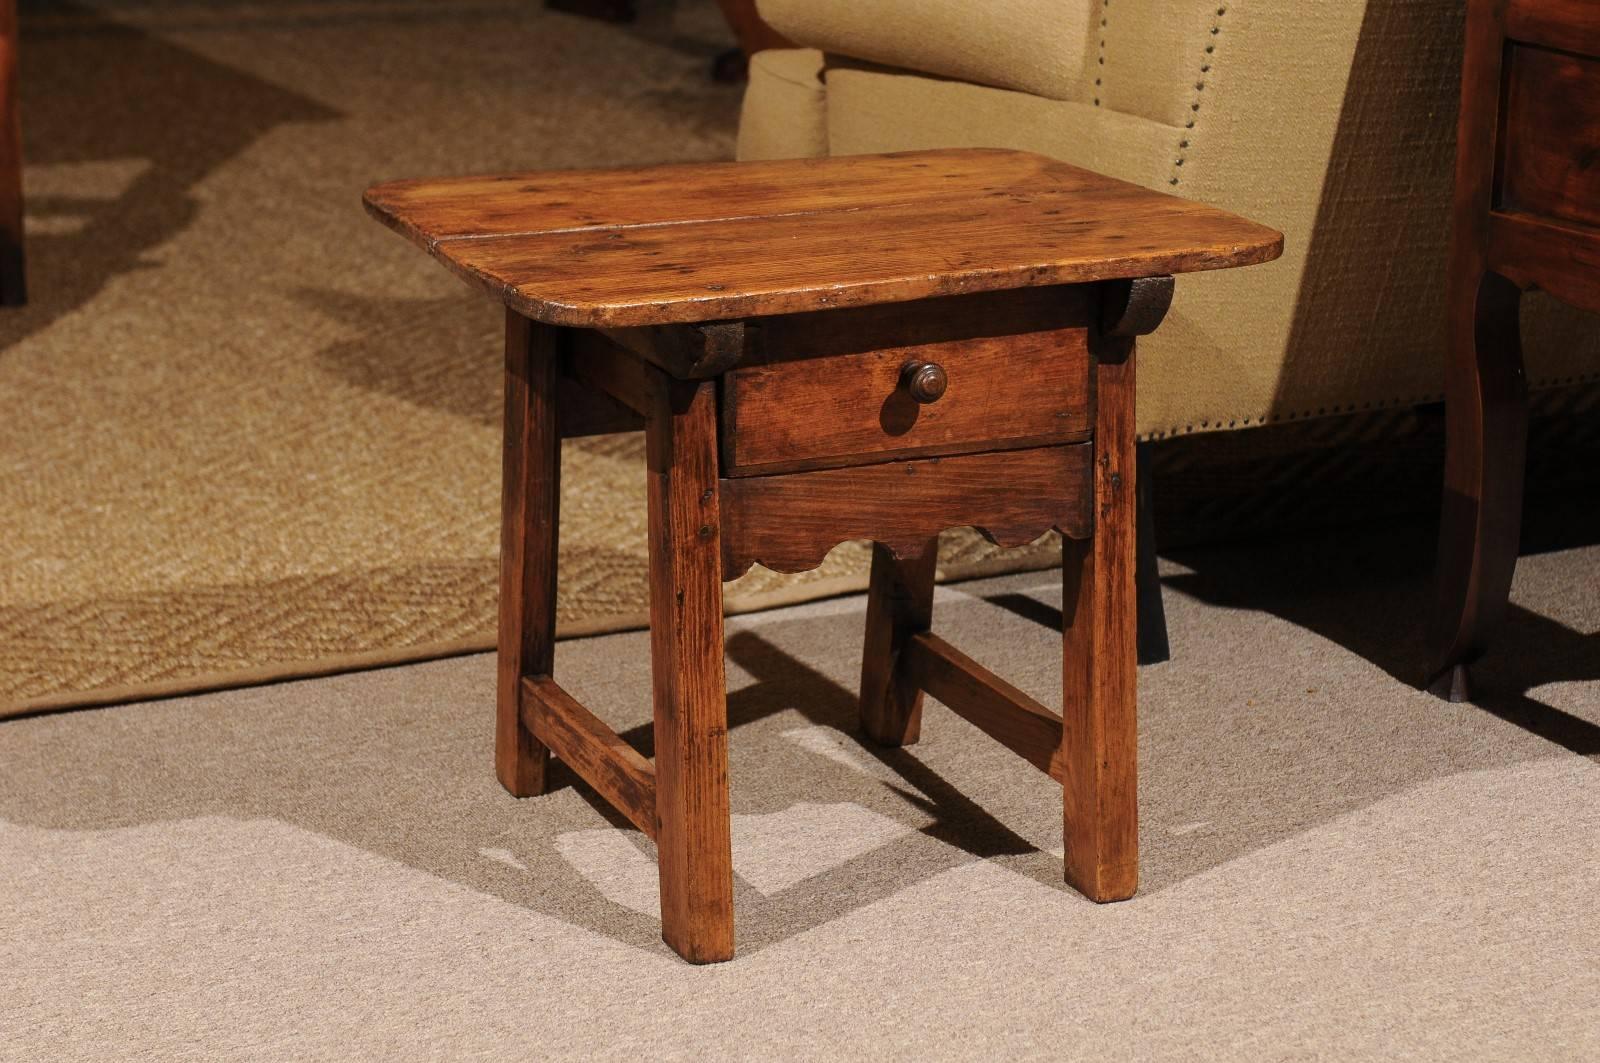 19th century pine Shepherds table from Spain
Our Clients often ask us for small tables to go beside a chair and this is a charming little solution. It is large enough for books, T.V. controllers, glasses, a drink and more. The drawer offers